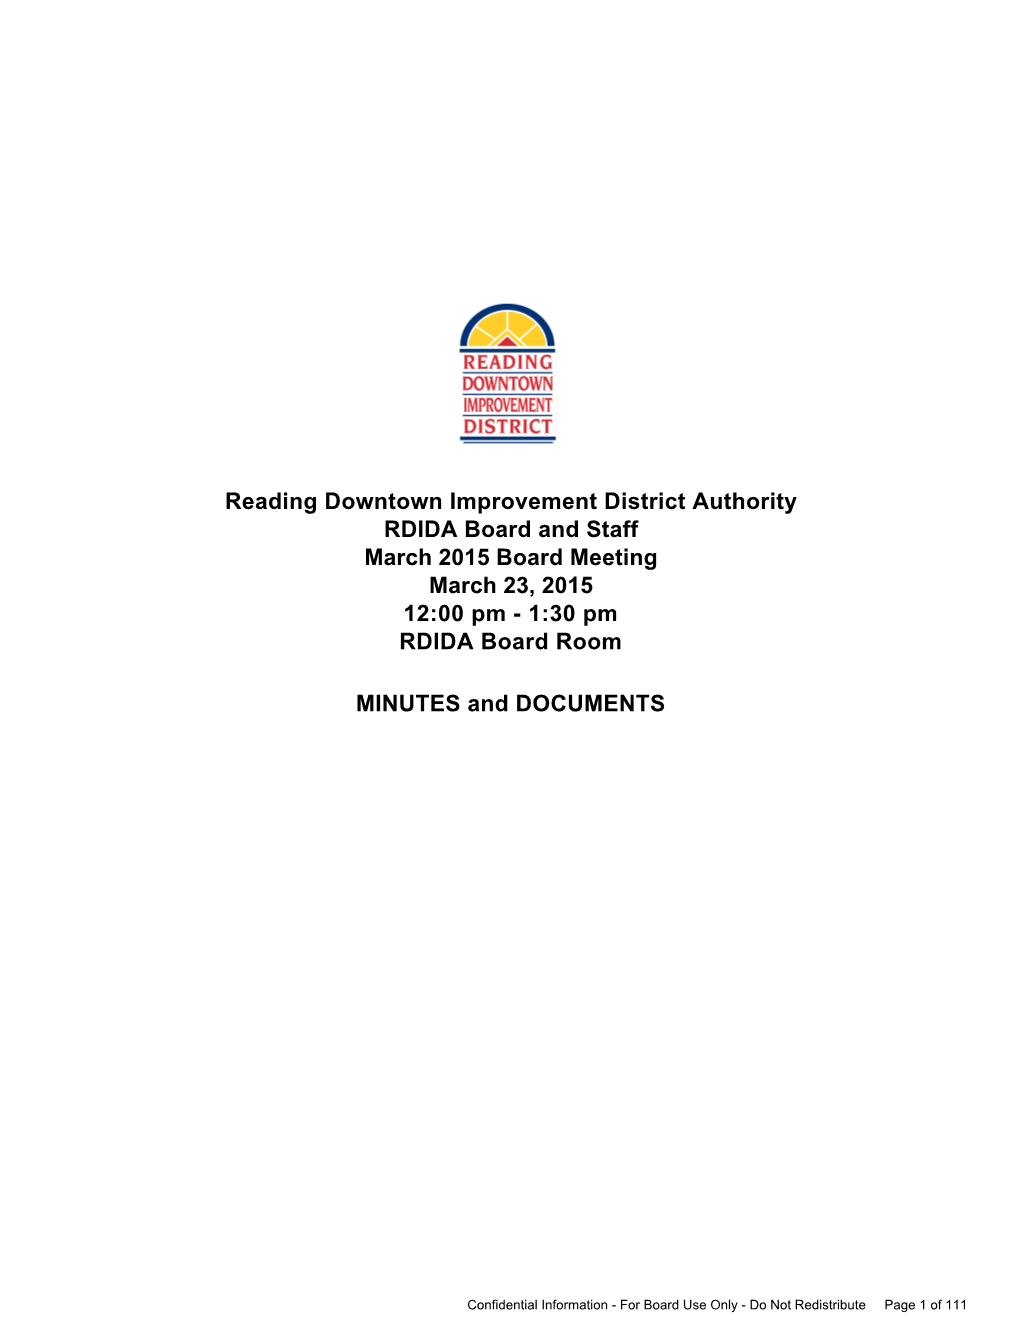 Reading Downtown Improvement District Authority RDIDA Board and Staff March 2015 Board Meeting March 23, 2015 12:00 Pm - 1:30 Pm RDIDA Board Room